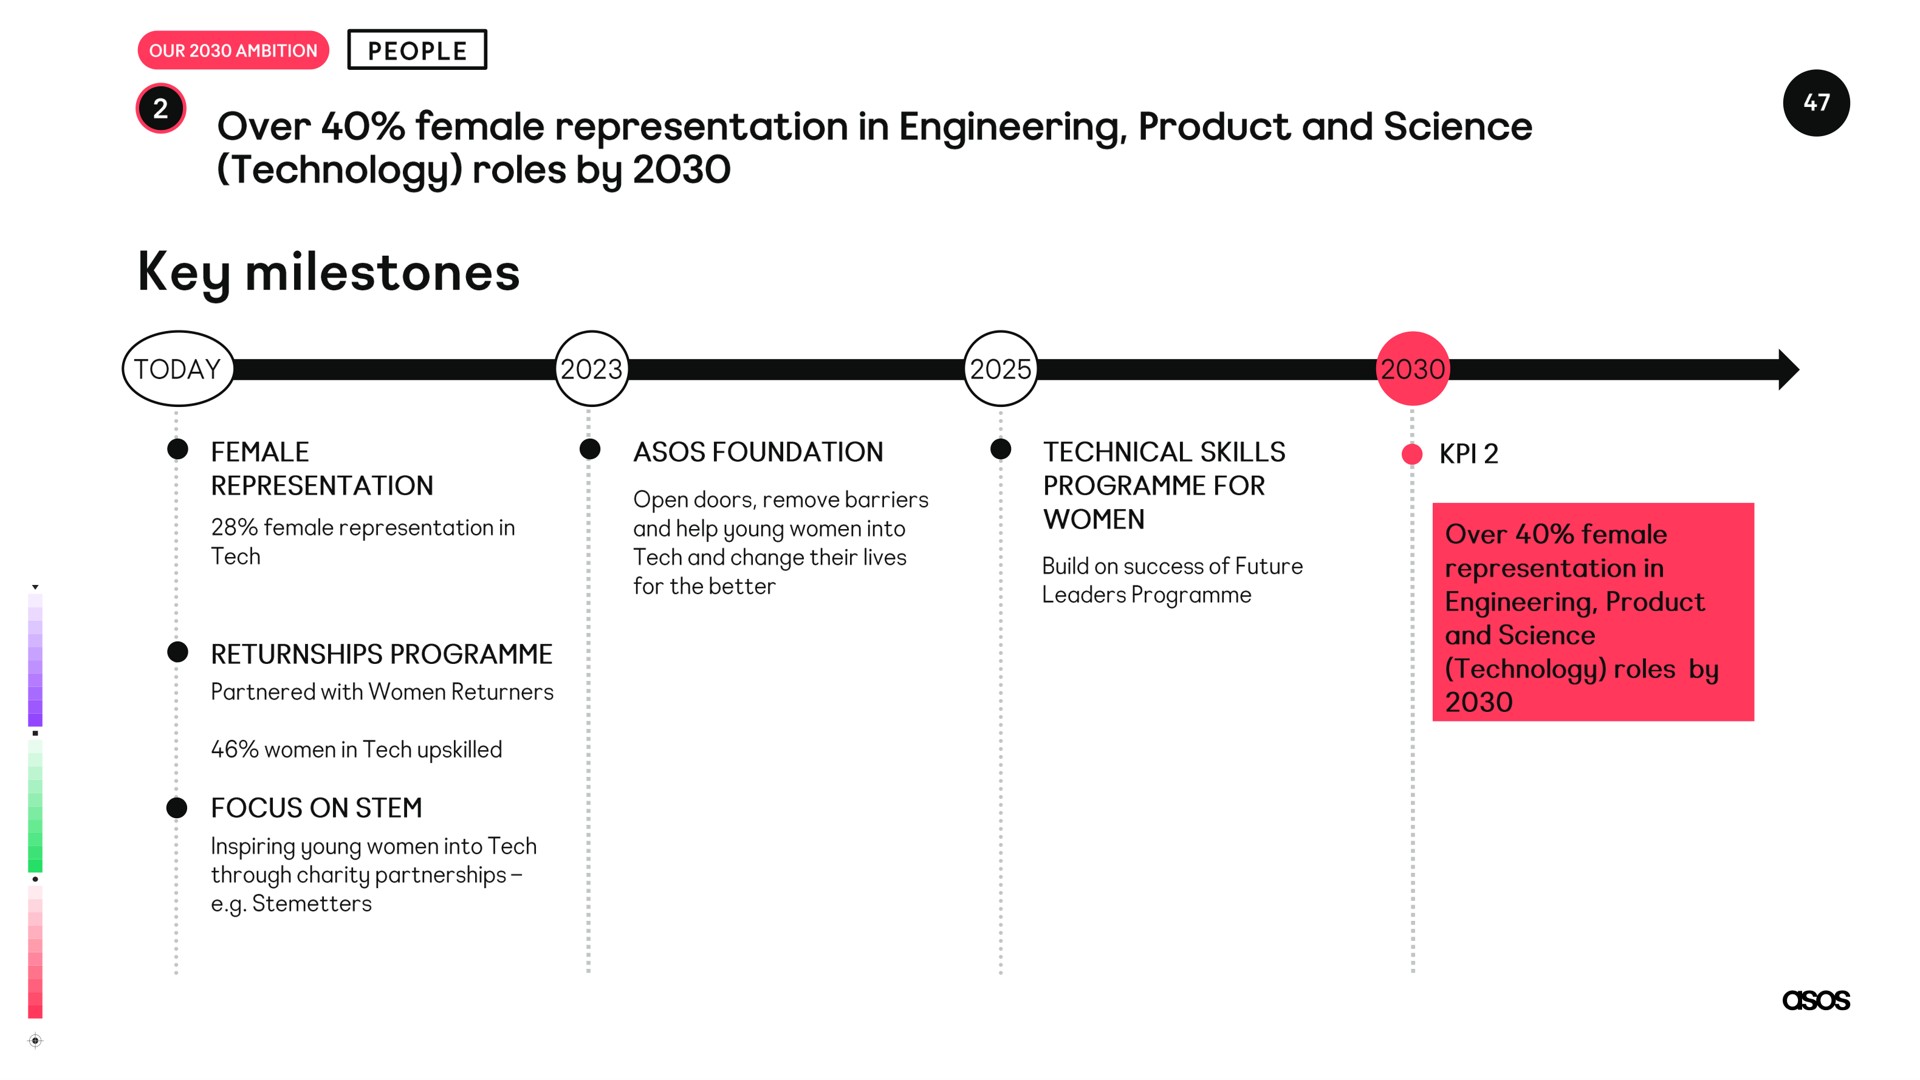 technology roles by key milestones | Asos